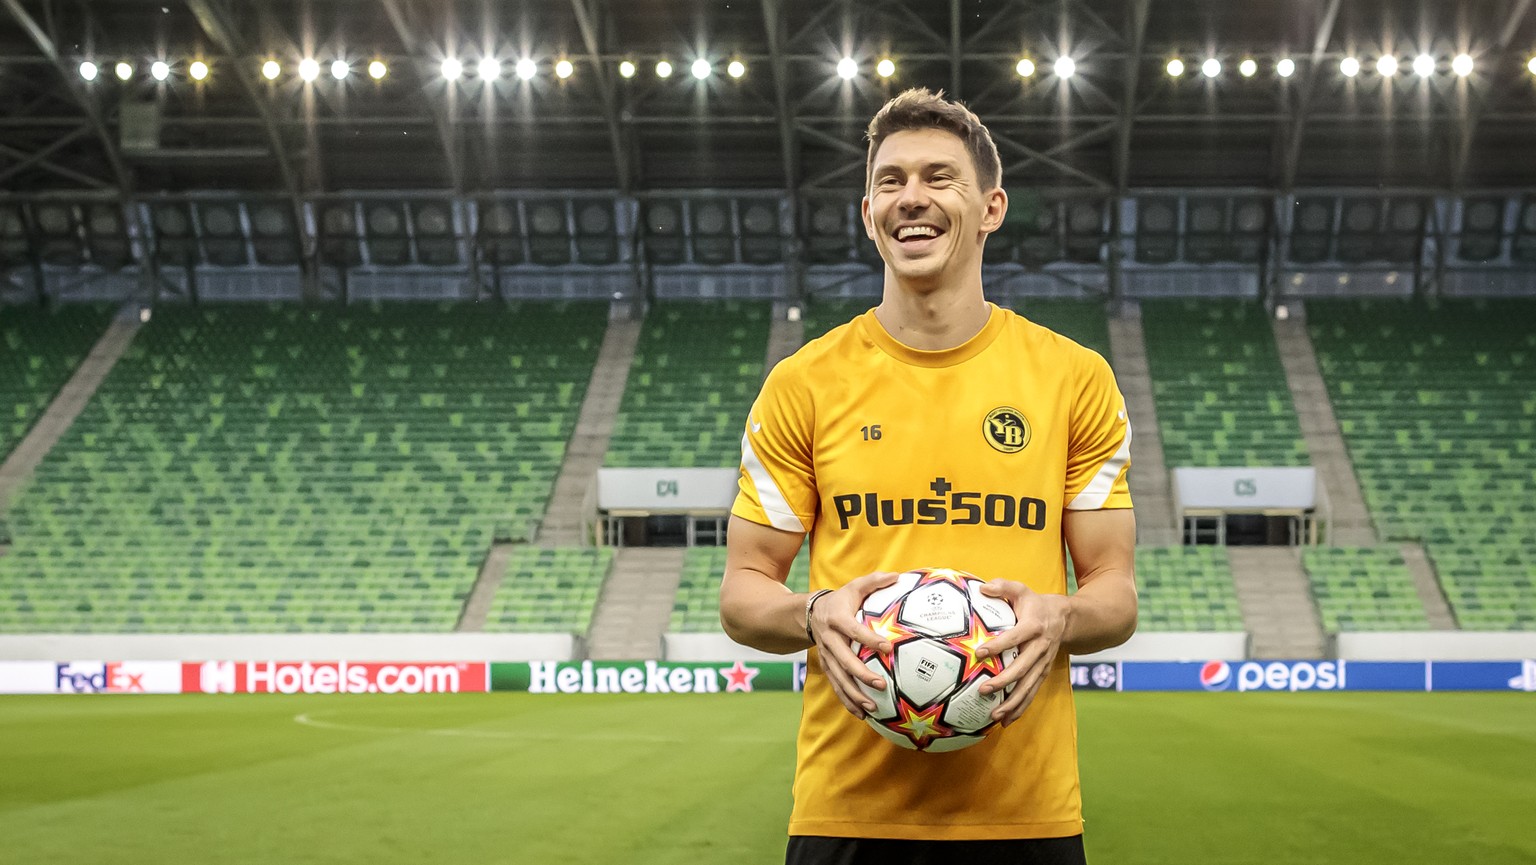 Young Boys' Christian Fassnacht poses after a training session before the UEFA Champions League playoff match between Hungary's Ferencvaros TC and Switzerland's BSC Young Boys, on Monday, August 23, 2 ...